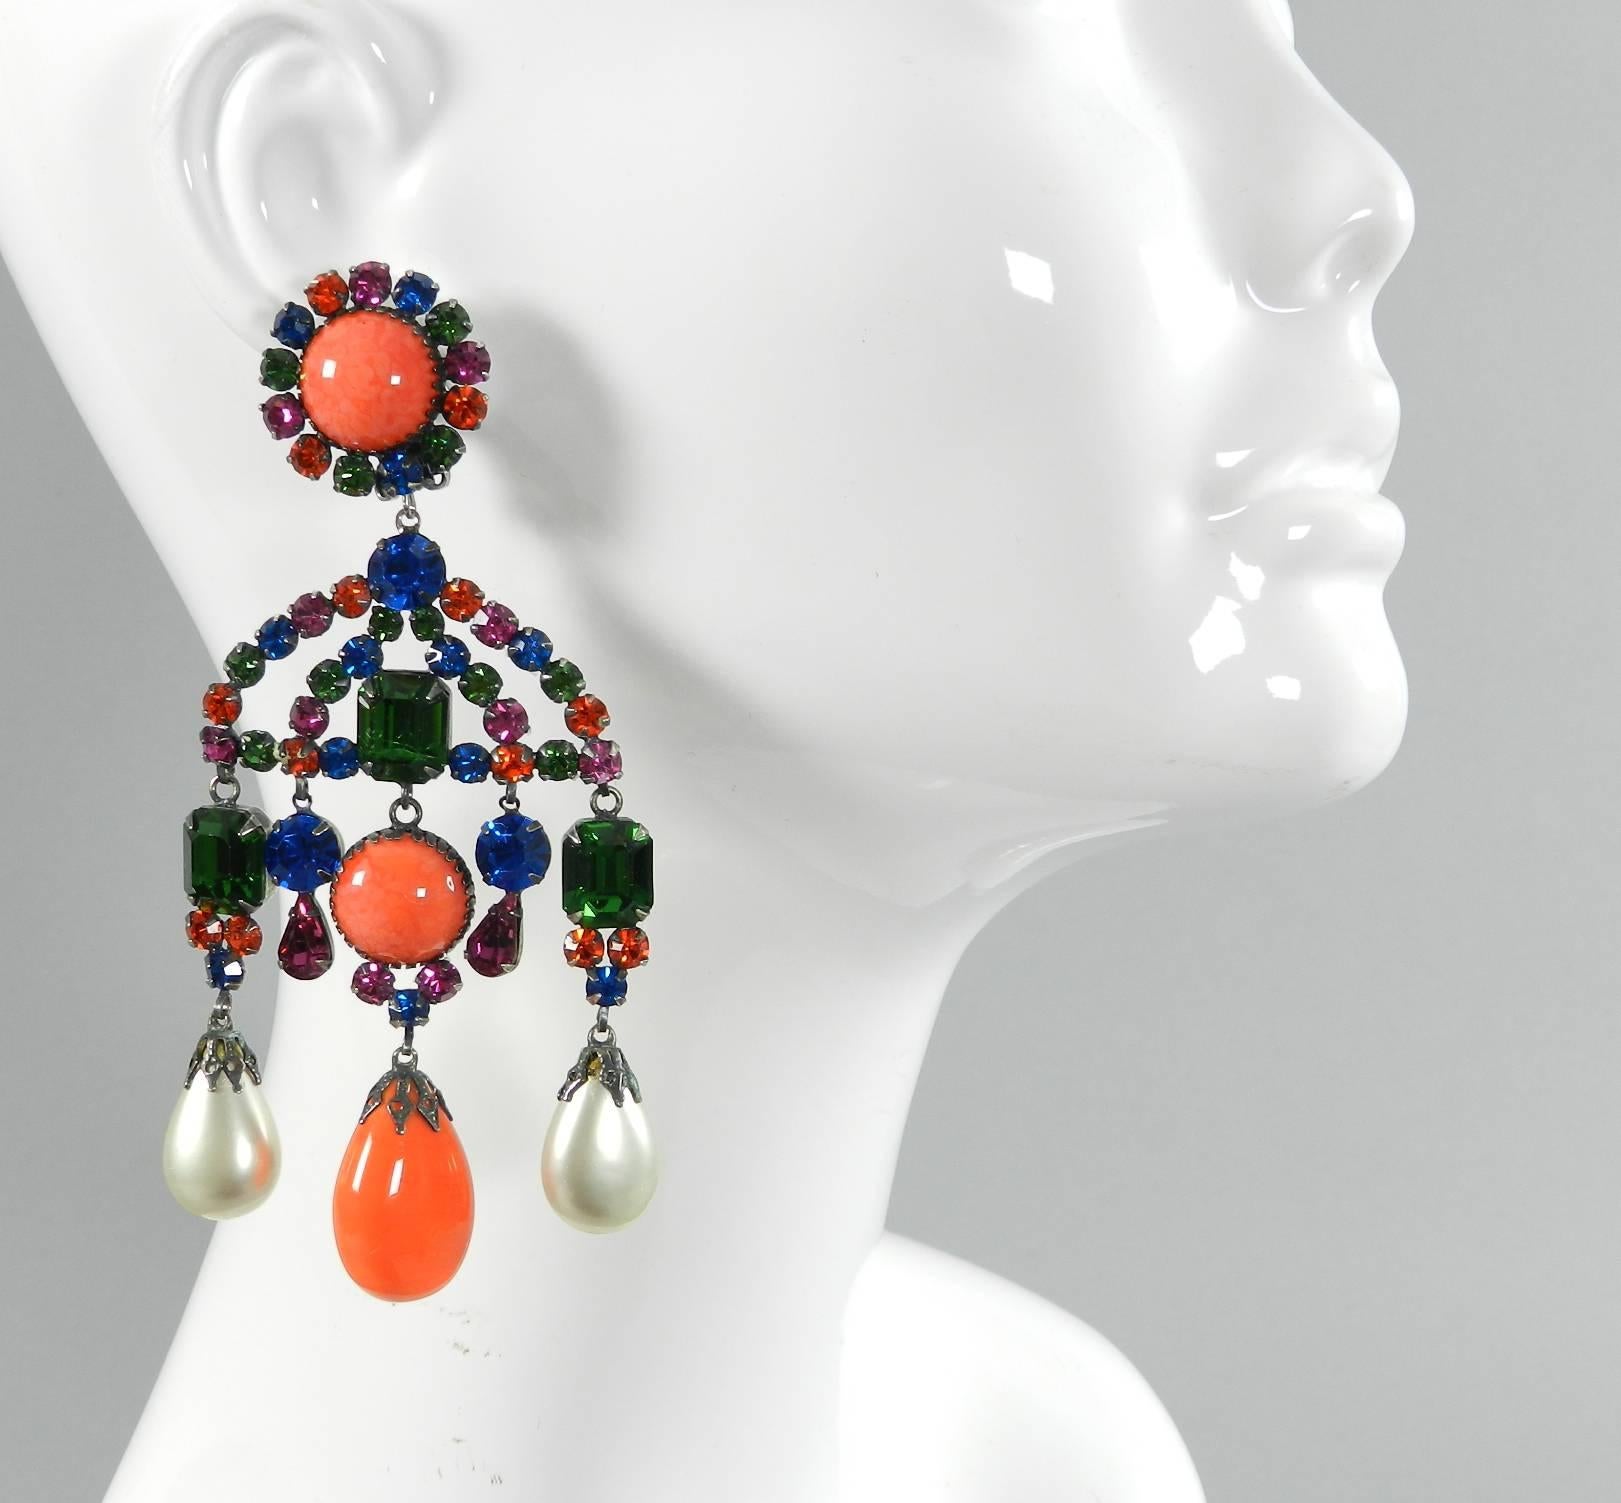 Early Kenneth Jay Lane KJL vintage 1960's large chandelier statement earrings. Clip on. Royal blue, green, orange, and fuchsia rhinestones with coral glass and faux pearls. Set in oxidized silvertone metal. Excellent condition. Measures 4.75